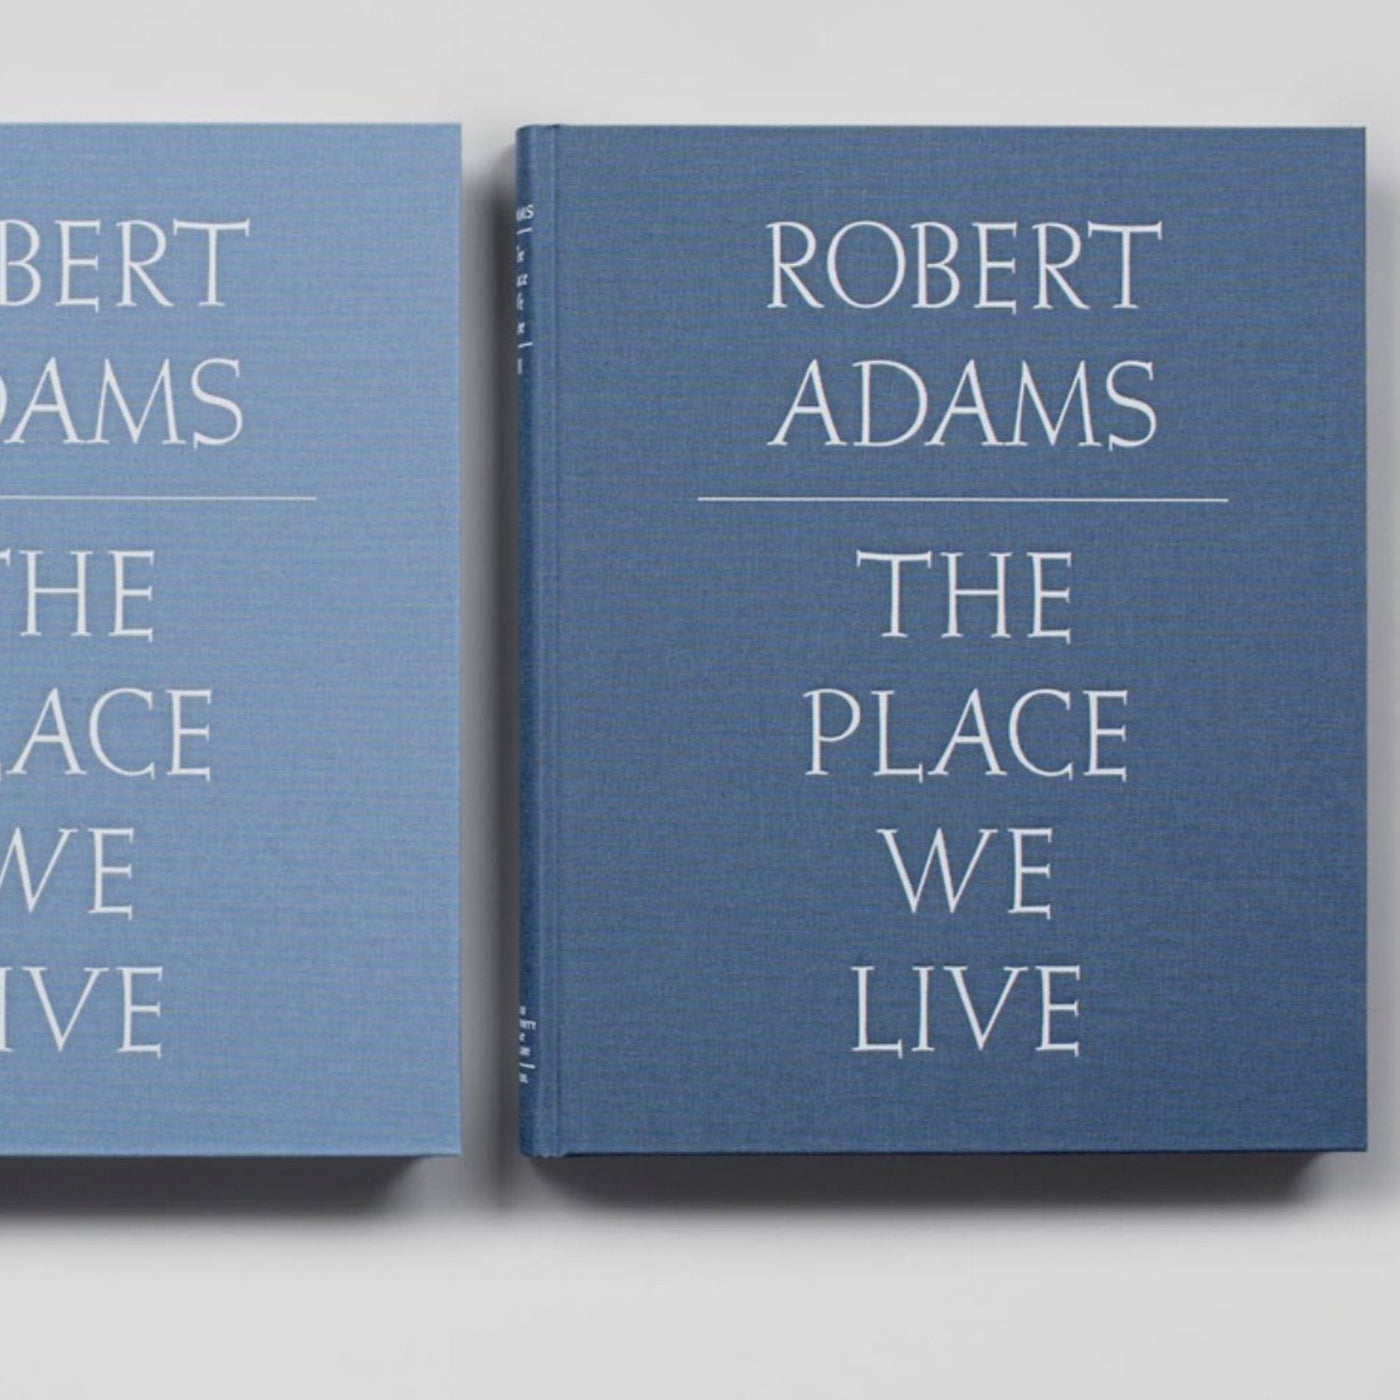 The Place We Live by Robert Adams - Tipi bookshop